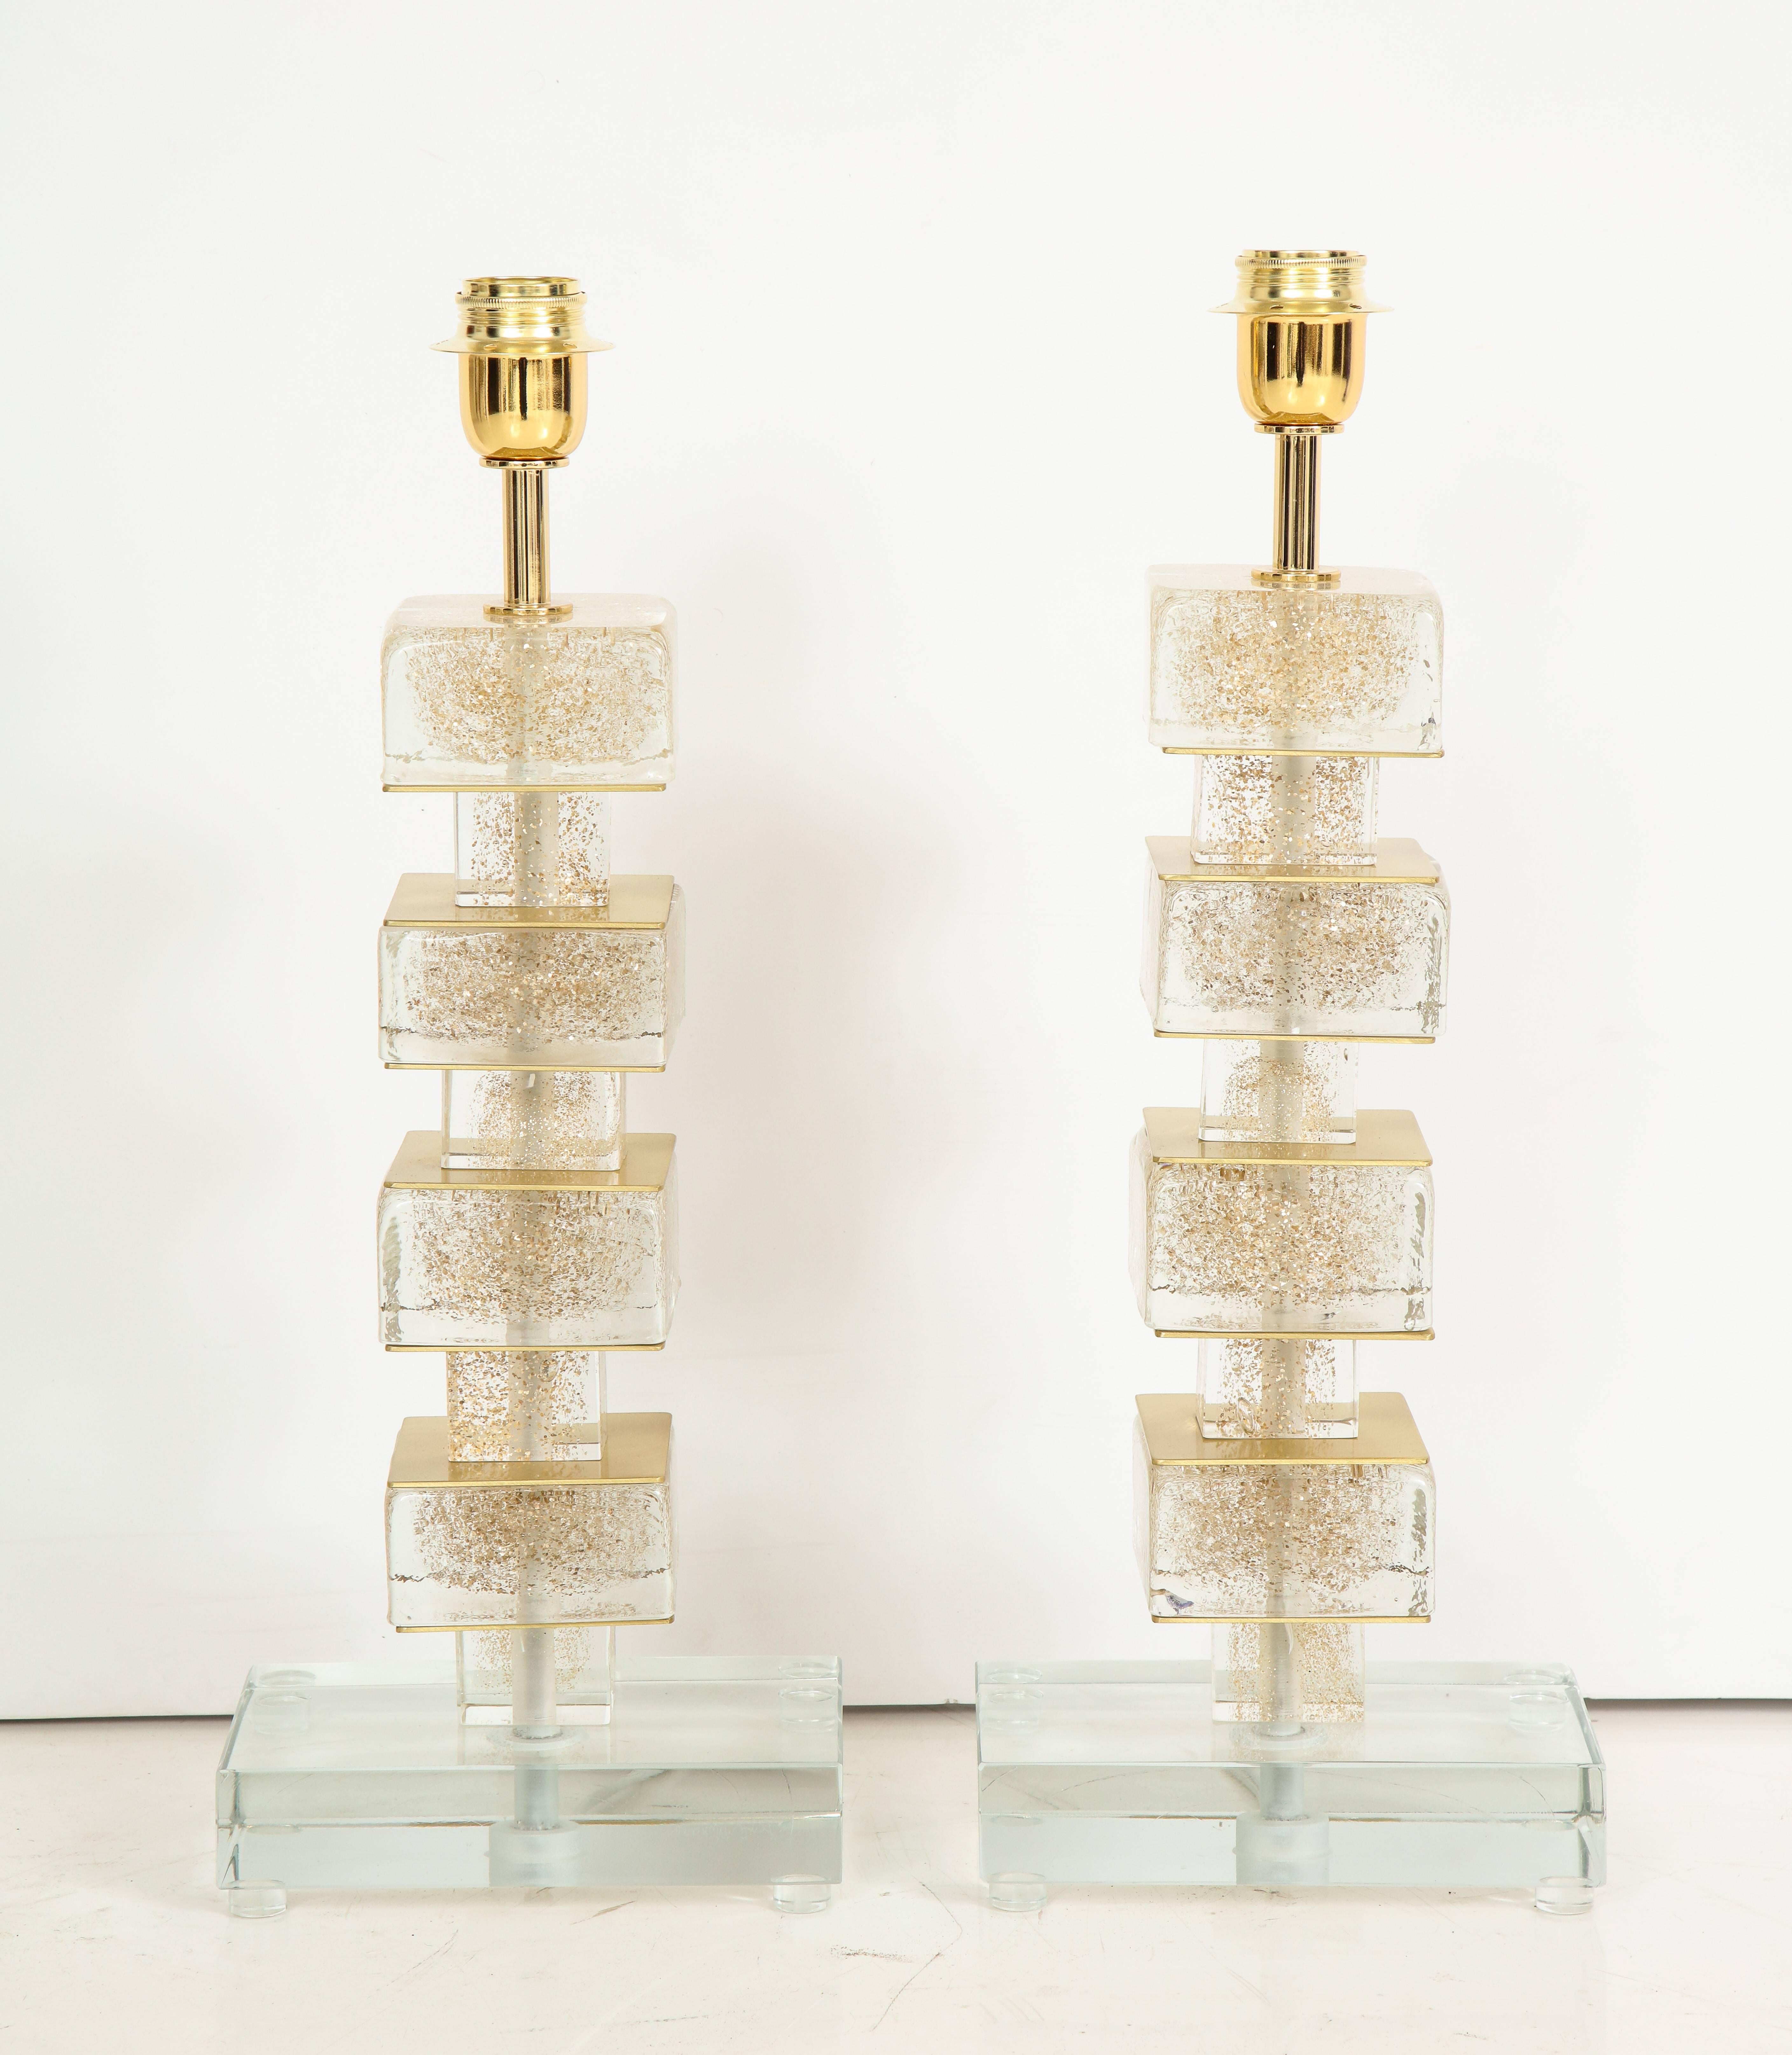 One of a kind pair of hand-casted and handcrafted Murano glass and brass lamps in clear glass infused with 24-karat gold flecks. Individual glass blocks are separated by brass plates and sit atop a solid clear Murano glass block base. Signed by the